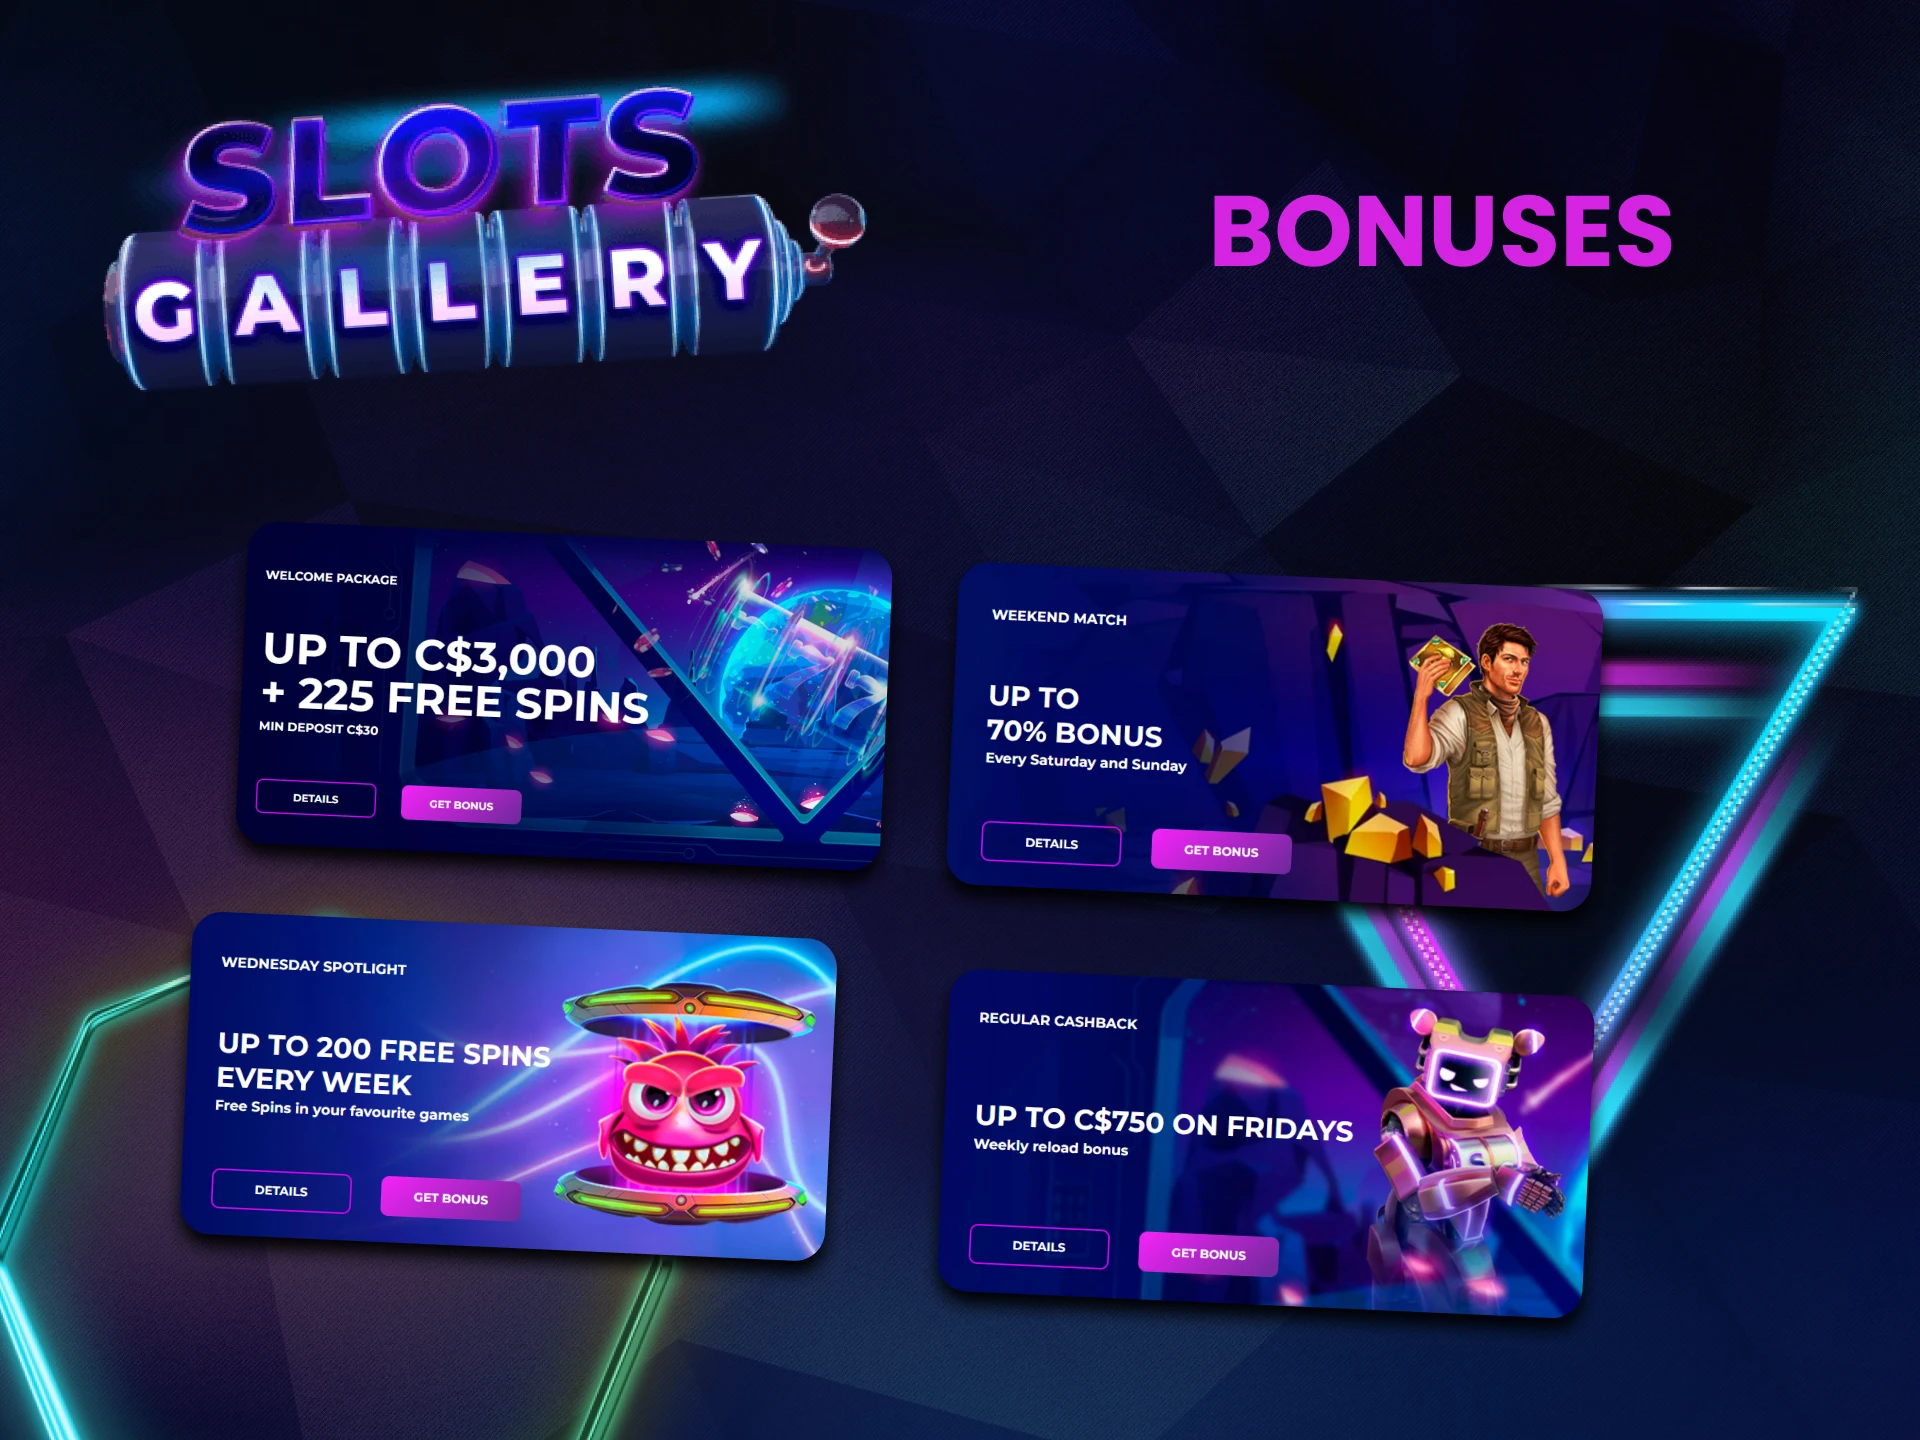 Slots Gallery gives bonuses to roulette players.